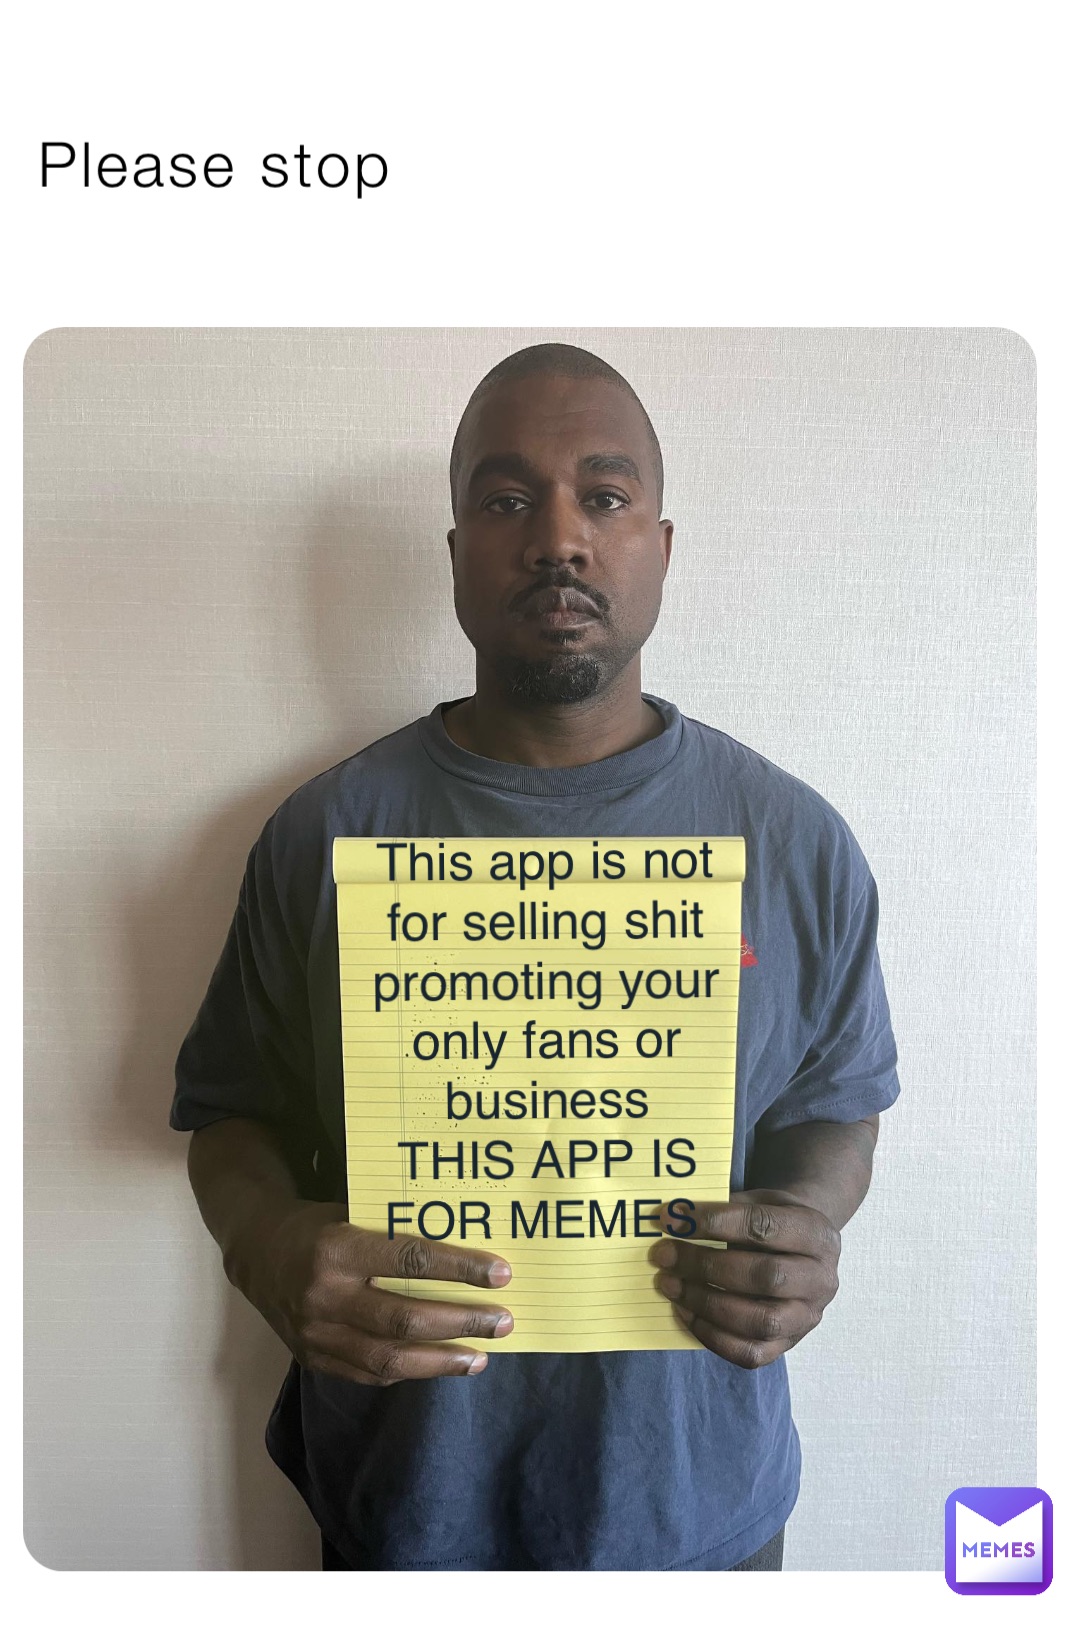 Please stop This app is not for selling shit promoting your only fans or business 
THIS APP IS FOR MEMES